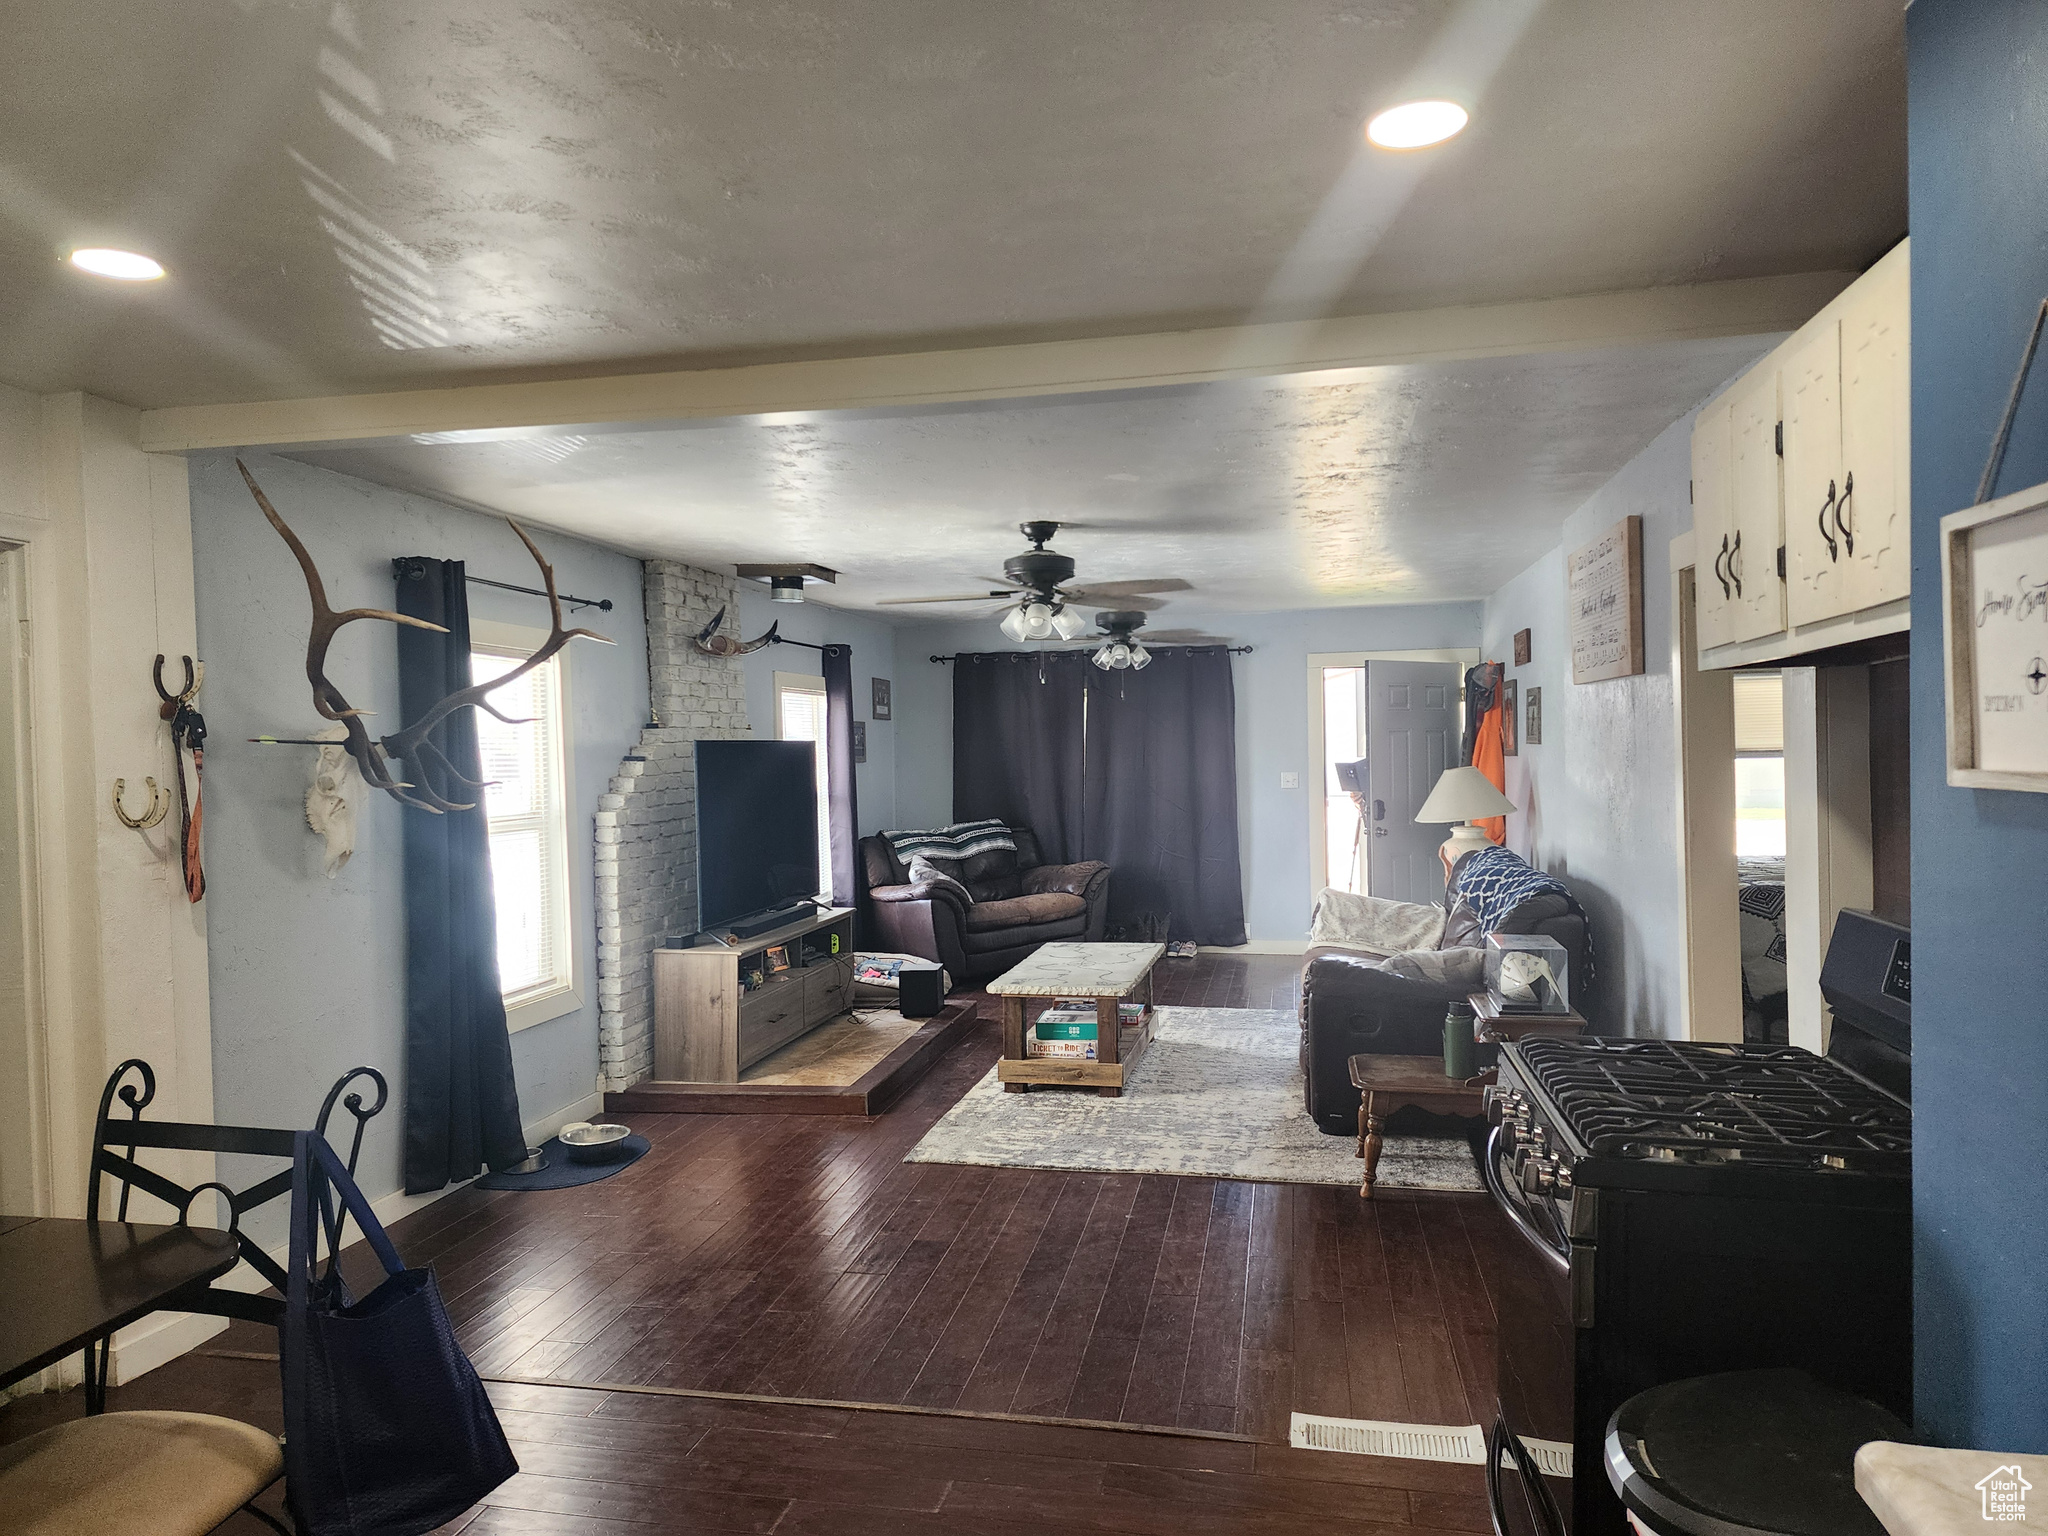 Living room with wood-type flooring, ceiling fan, and a healthy amount of sunlight